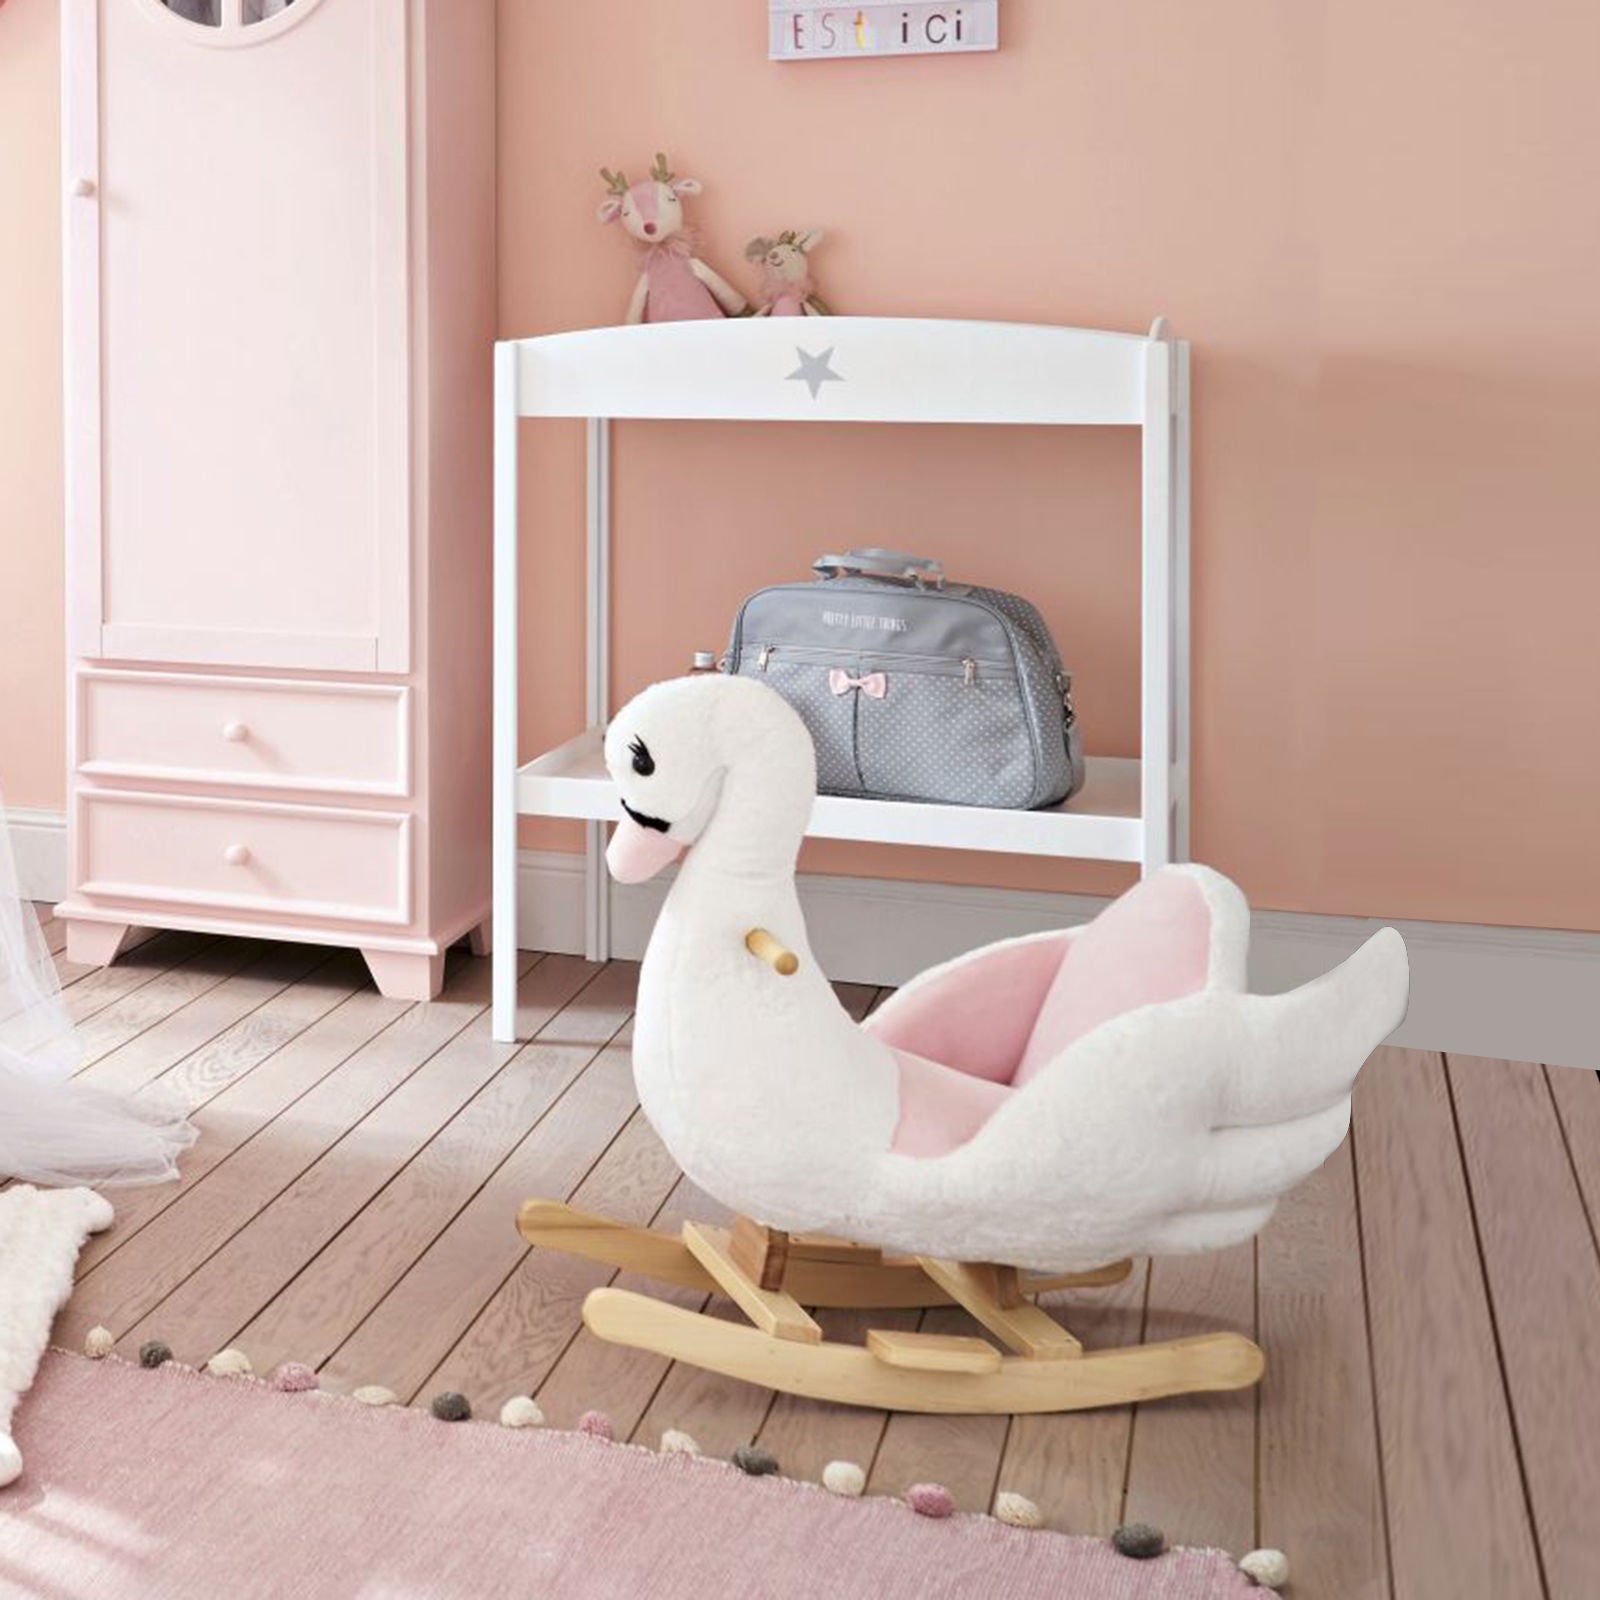 Nancy's Central Rocking Animal Swan - Roze, Wit - Pluche, Hout, Staal - L60 x B32 x H55 cm